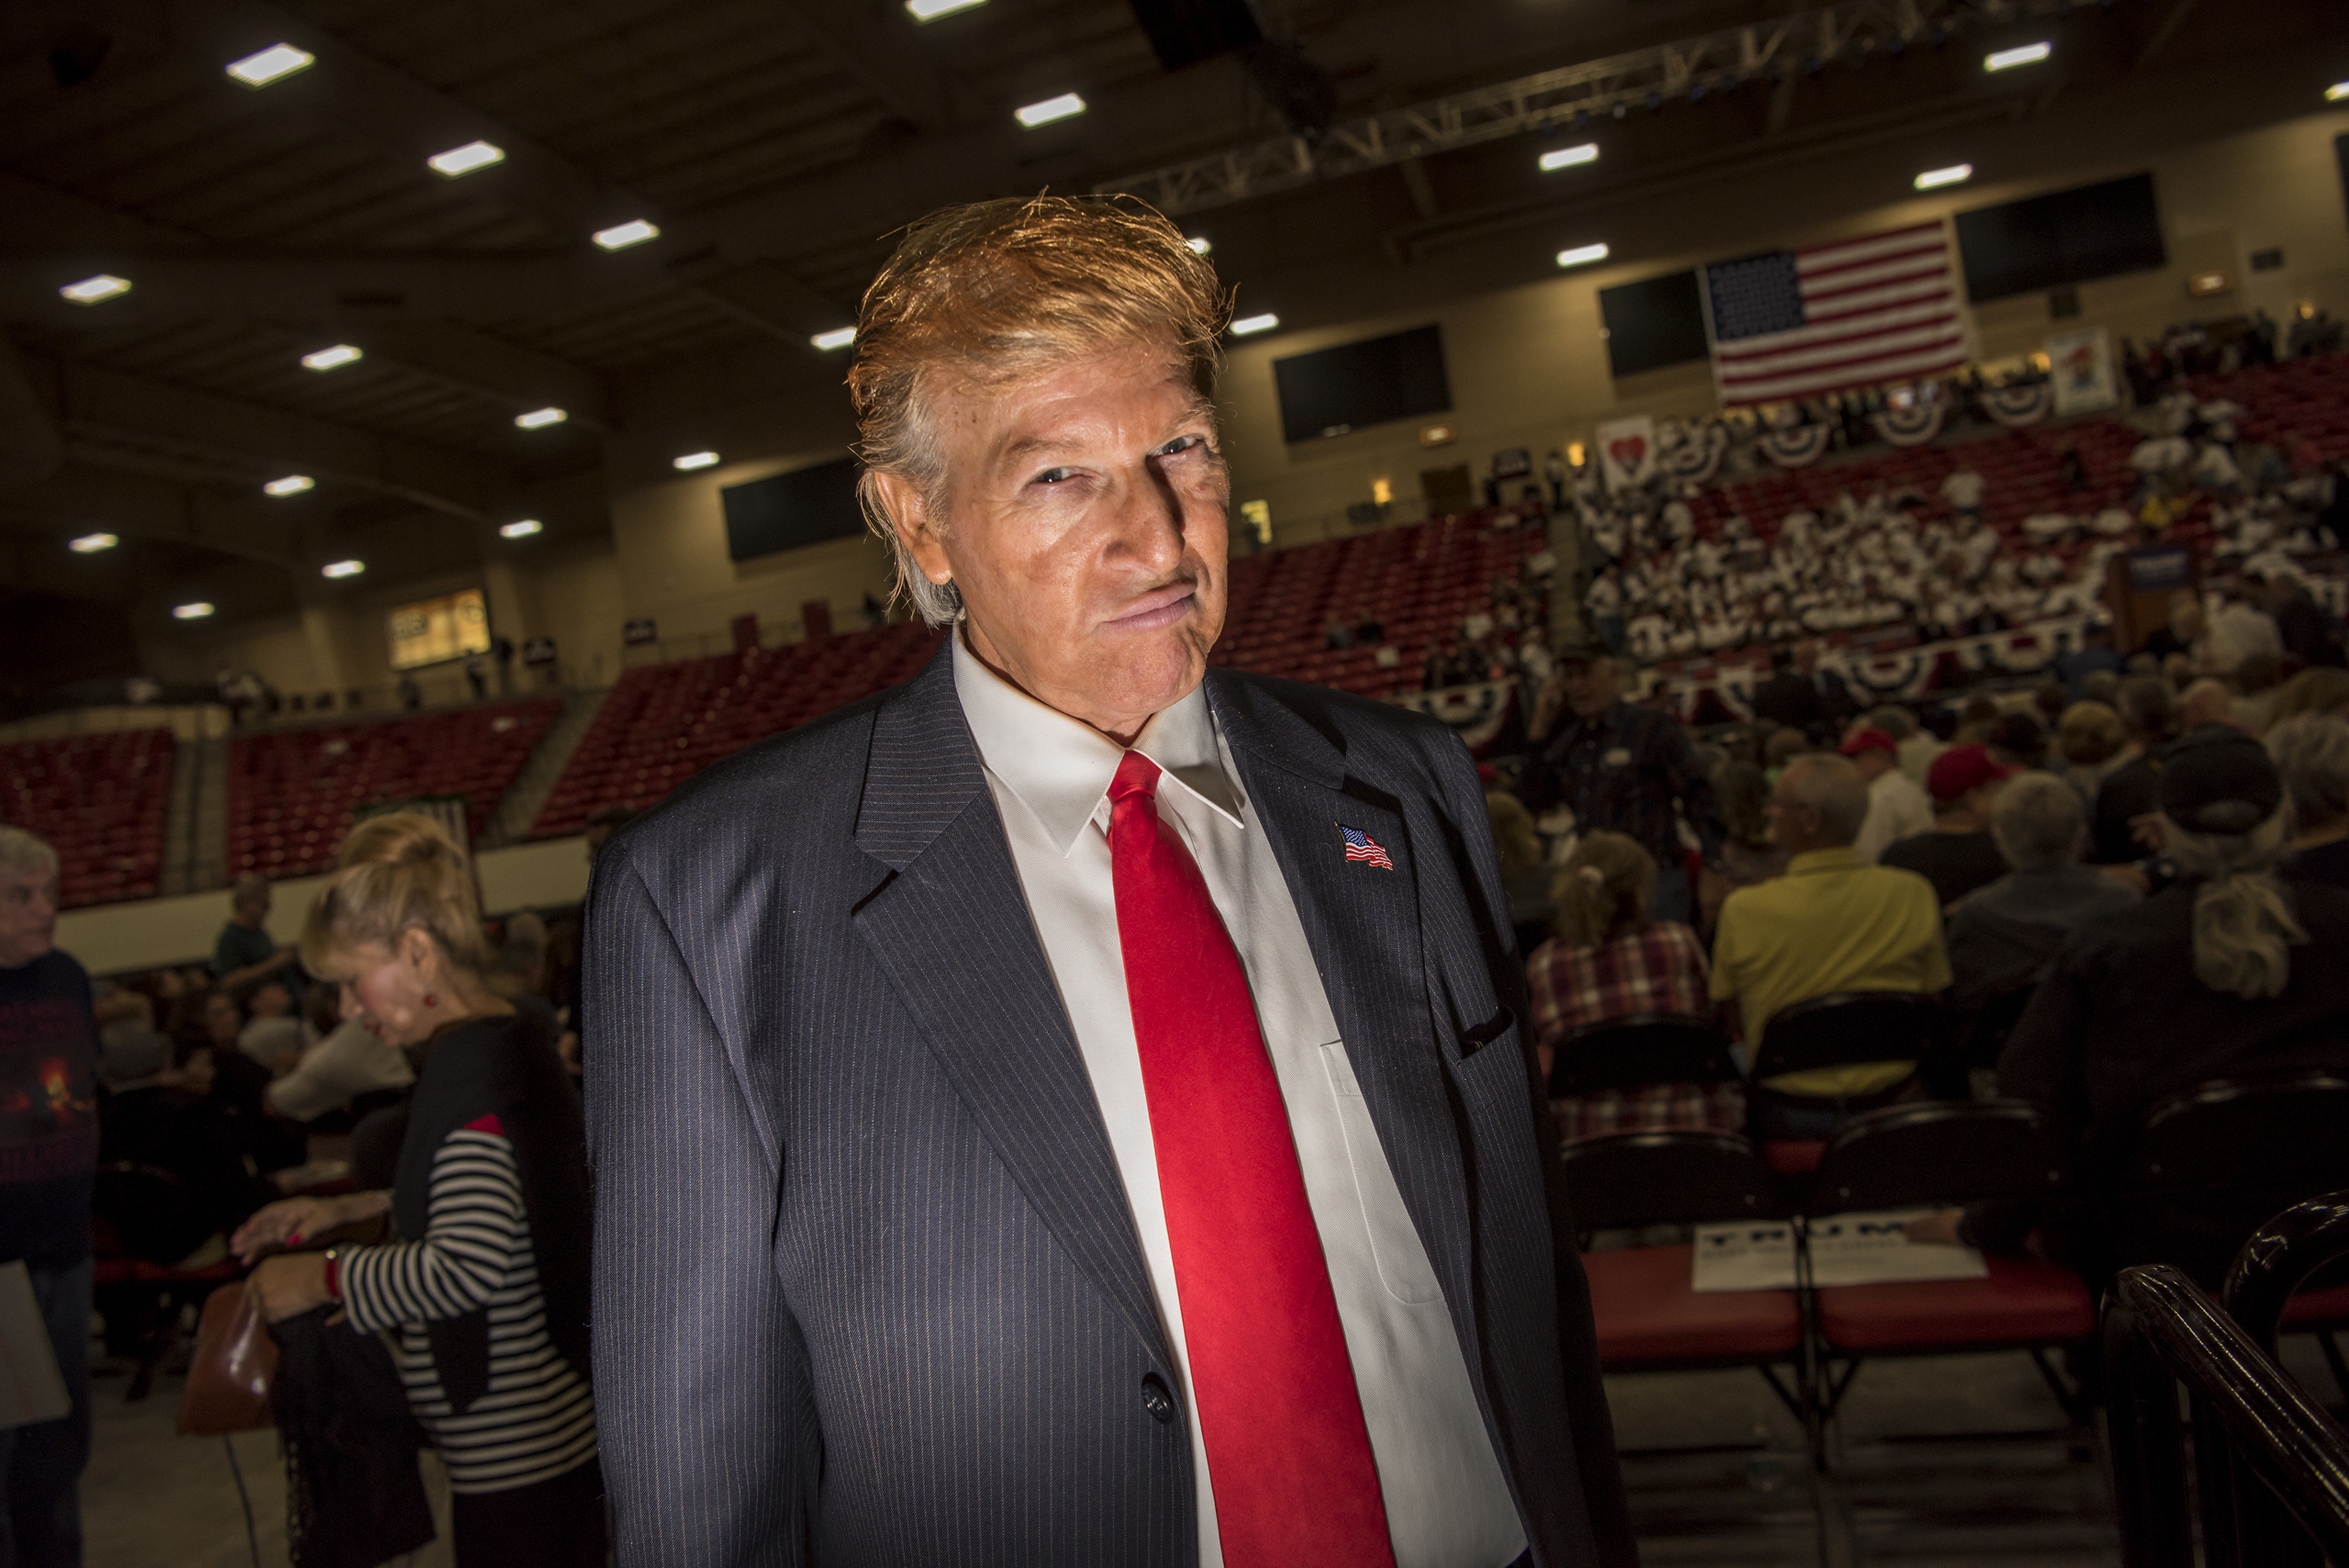 Donald Trump impersonator Robert Ensler stands for a photograph before Trump, speaks at a campaign rally in Las Vegas on Feb. 22, 2016.U.S., on Monday, Feb. 22, 2016.